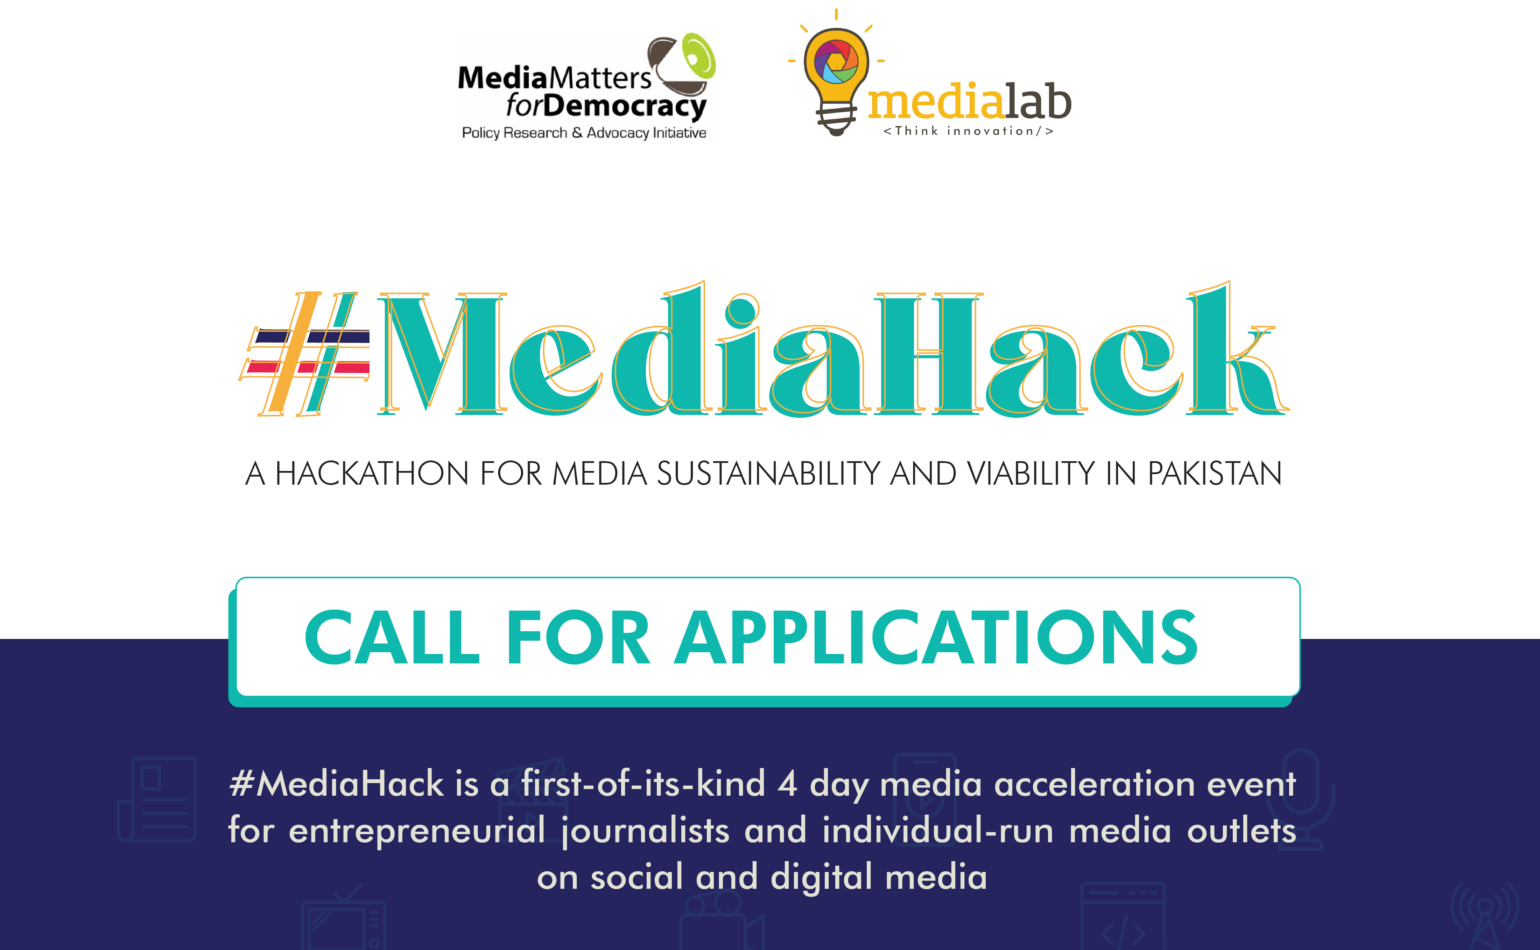 Announcing #MediaHack – A Hackathon for Media Sustainability and Viability in Pakistan